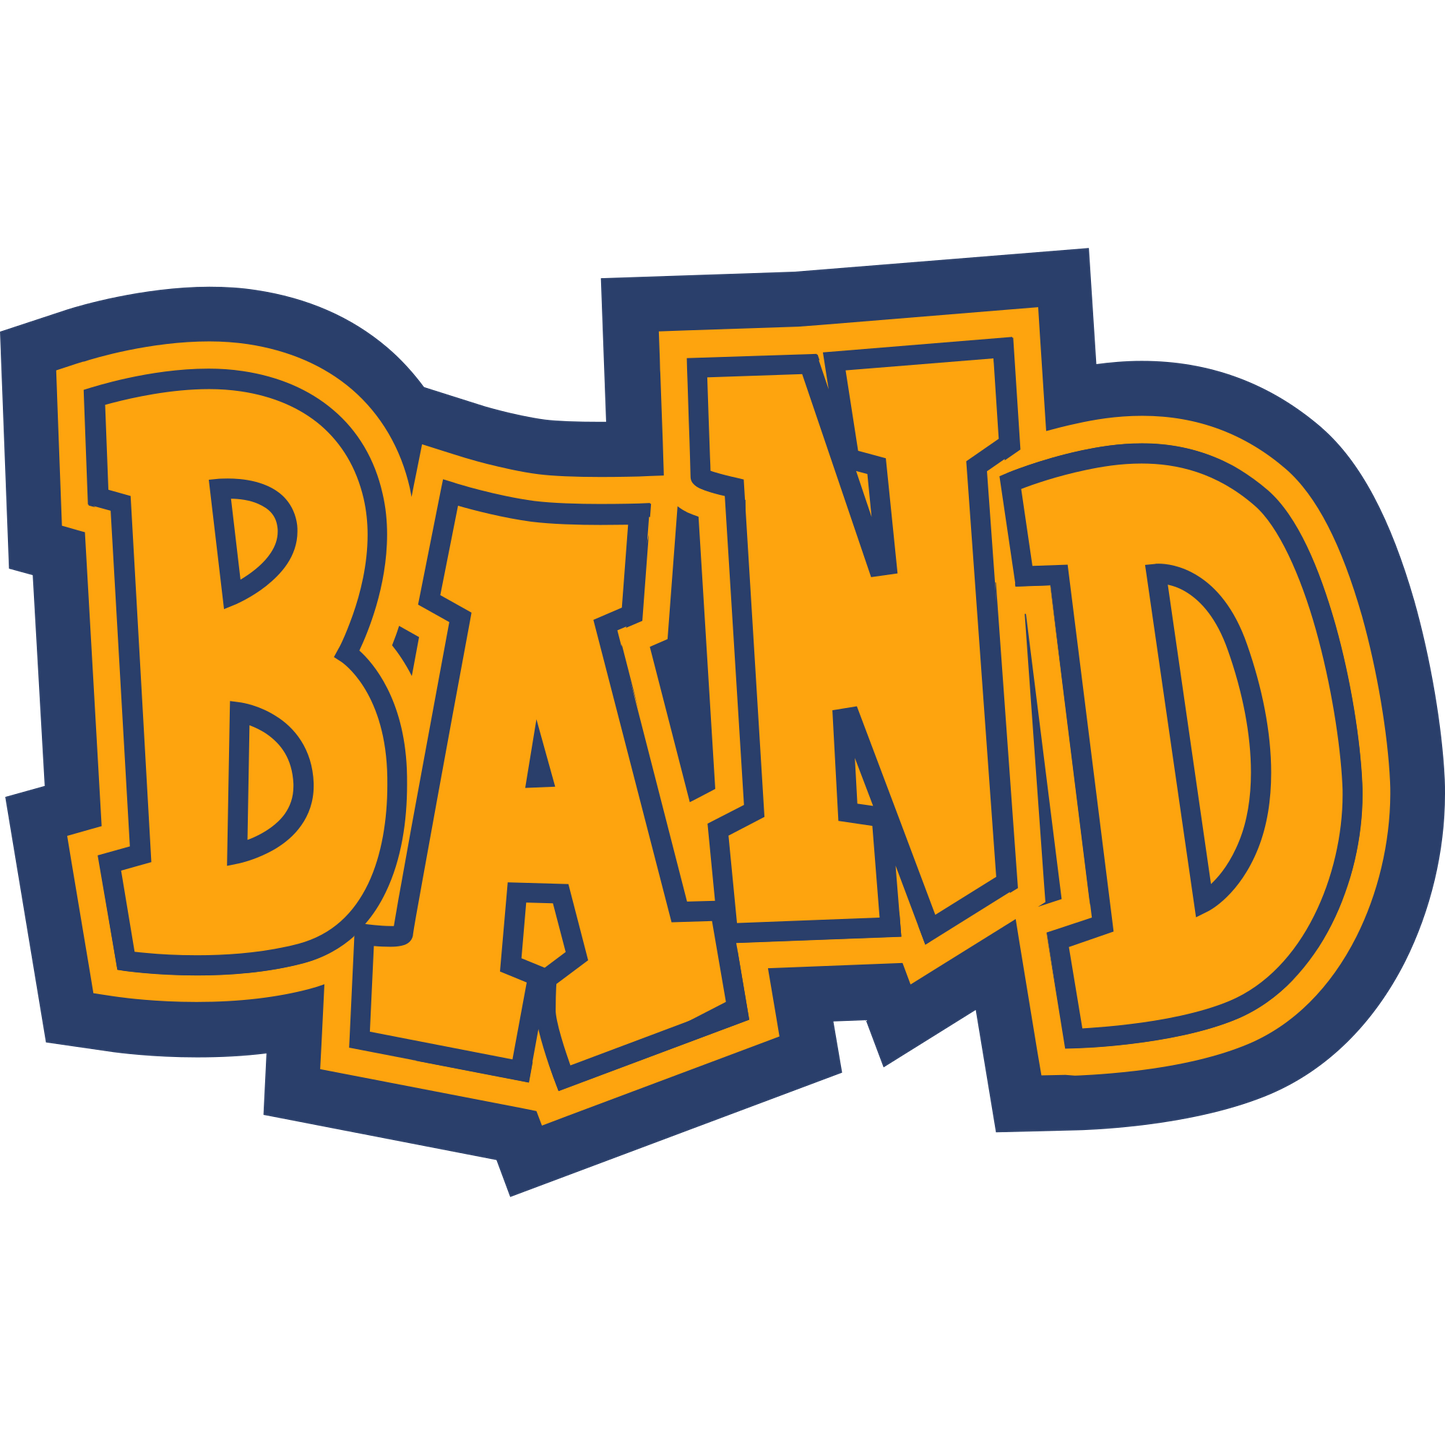 TBAND - Band Text Sleeve Patch